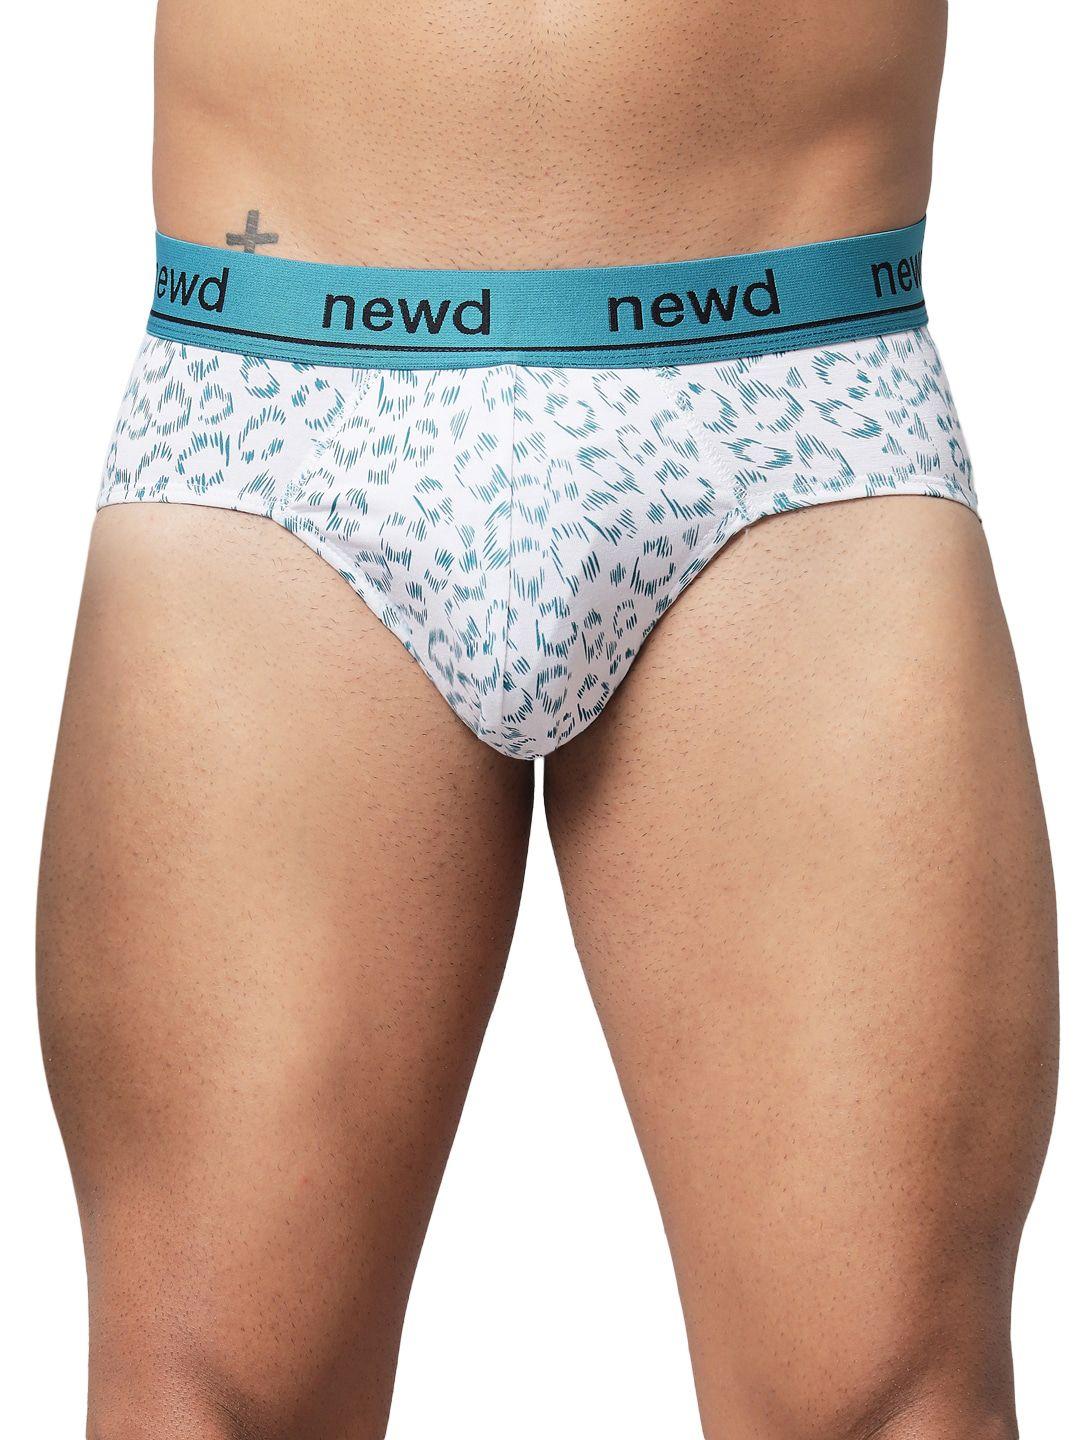 newd abstract printed logo-band briefs -nbp16-white-s